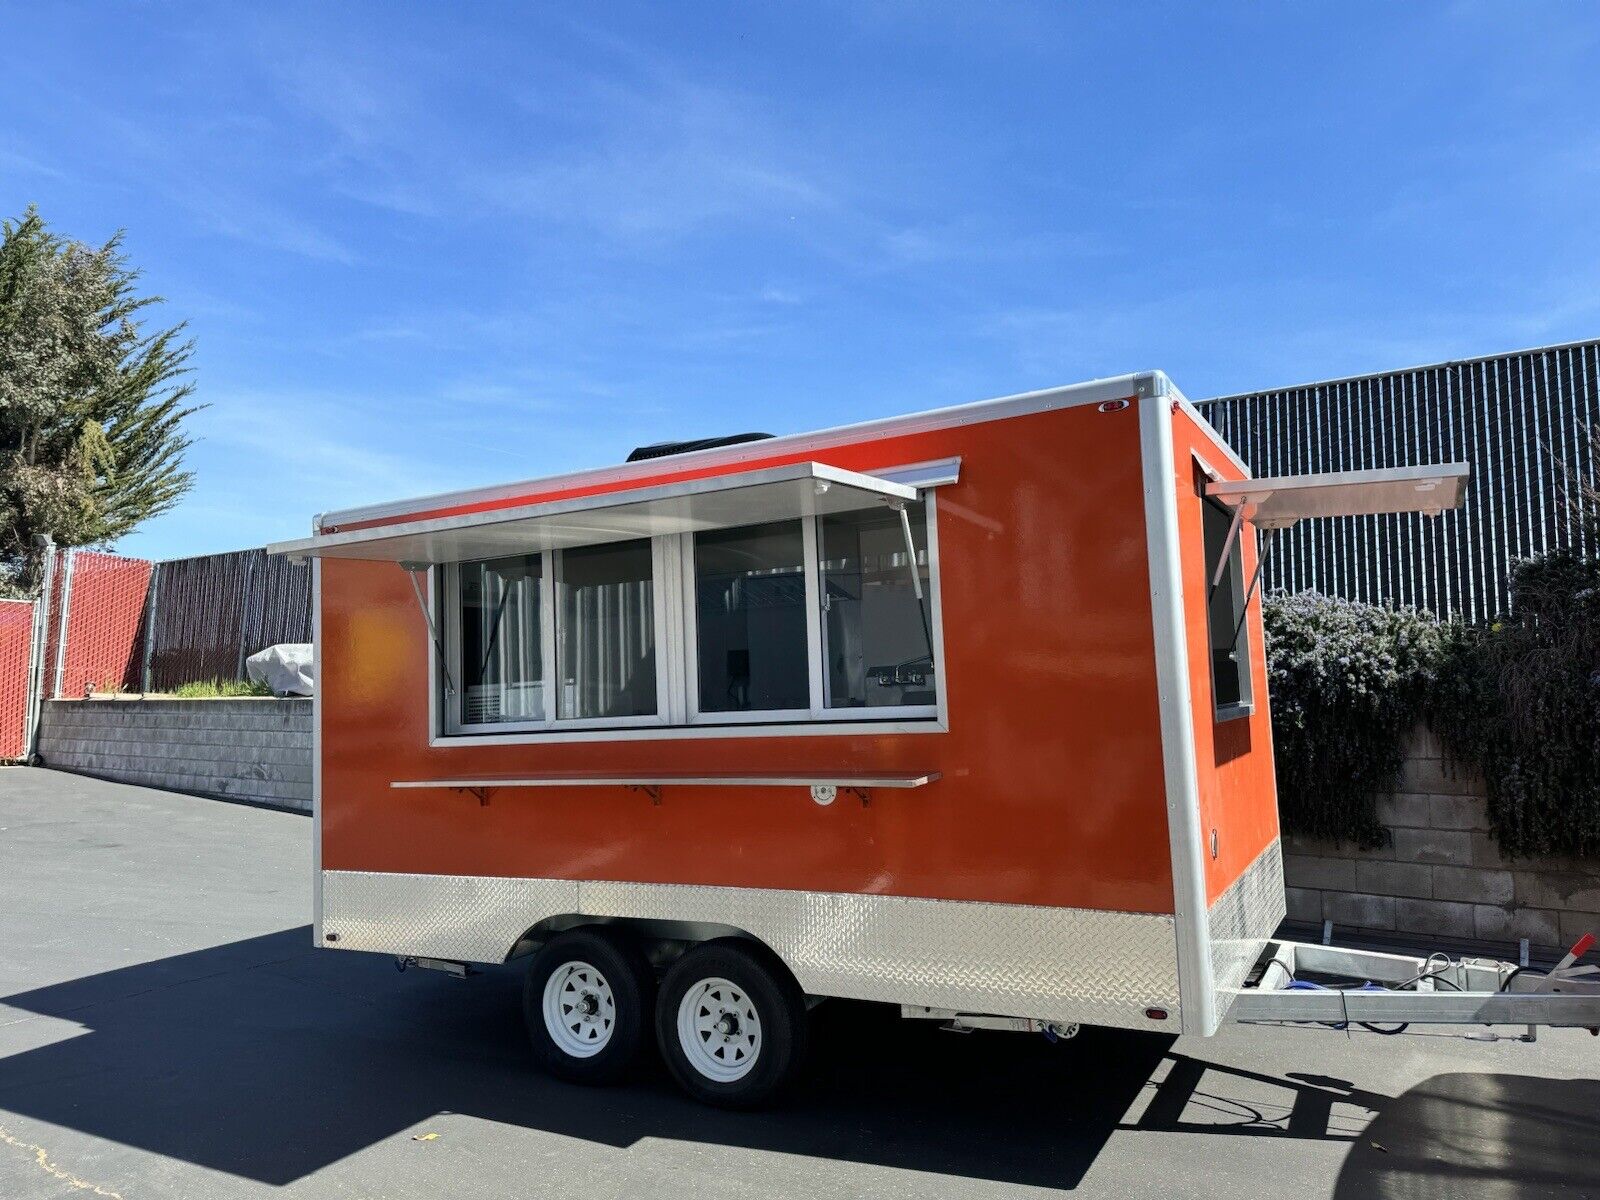 NEW 🔥 7x14 Food Concession Trailer, EVERYTHING Included, Ships From California